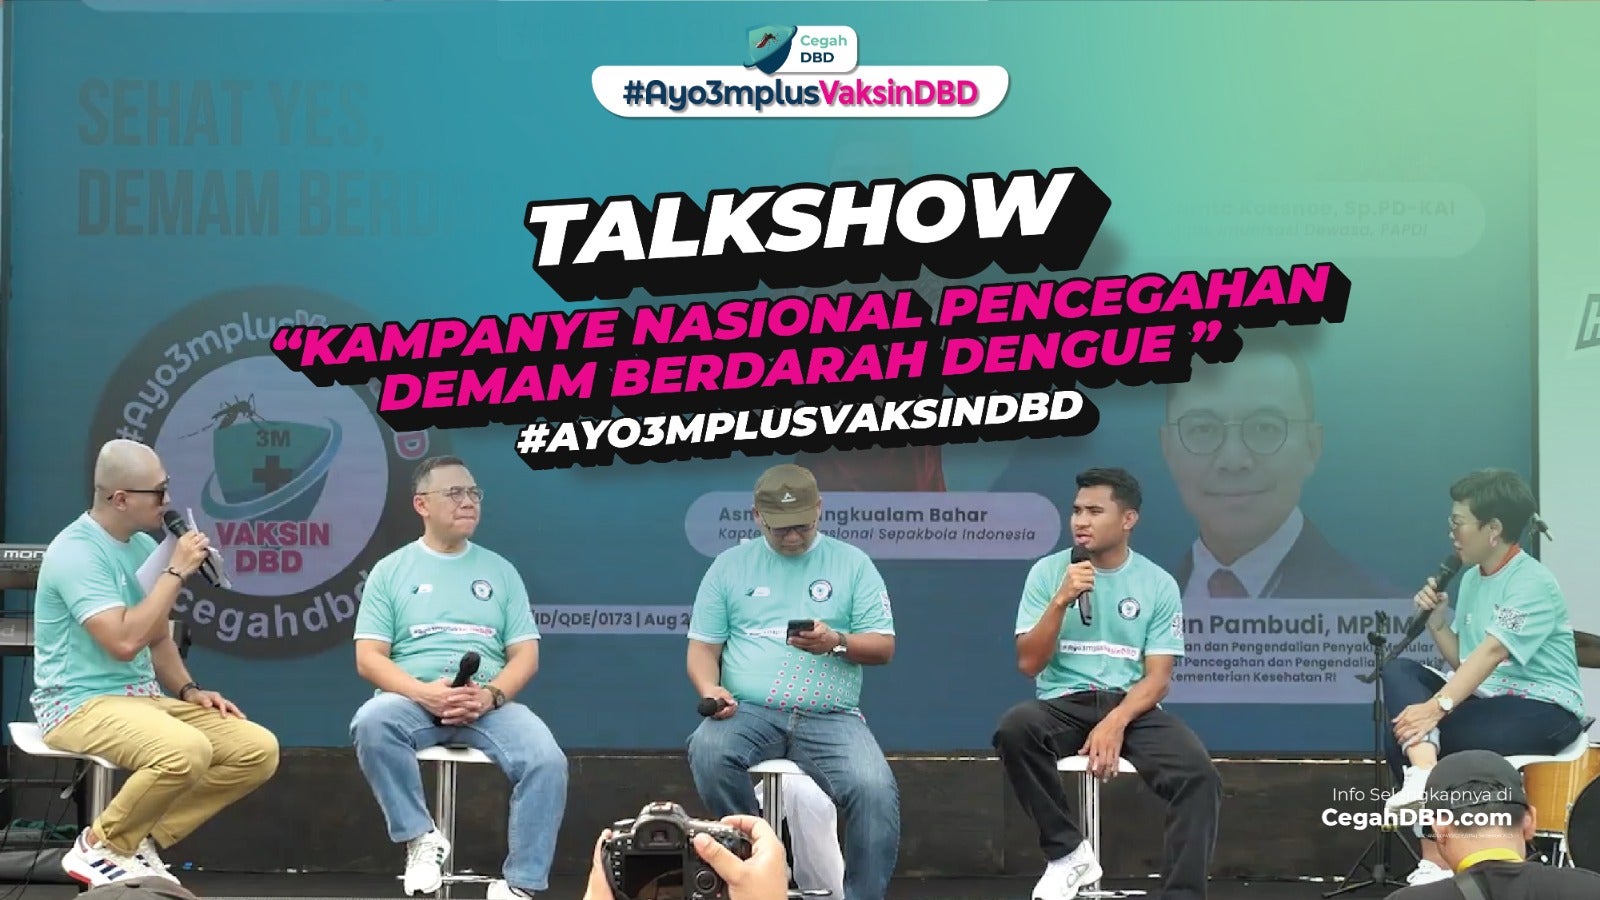 Talkshow Sehat Yes, DBD No